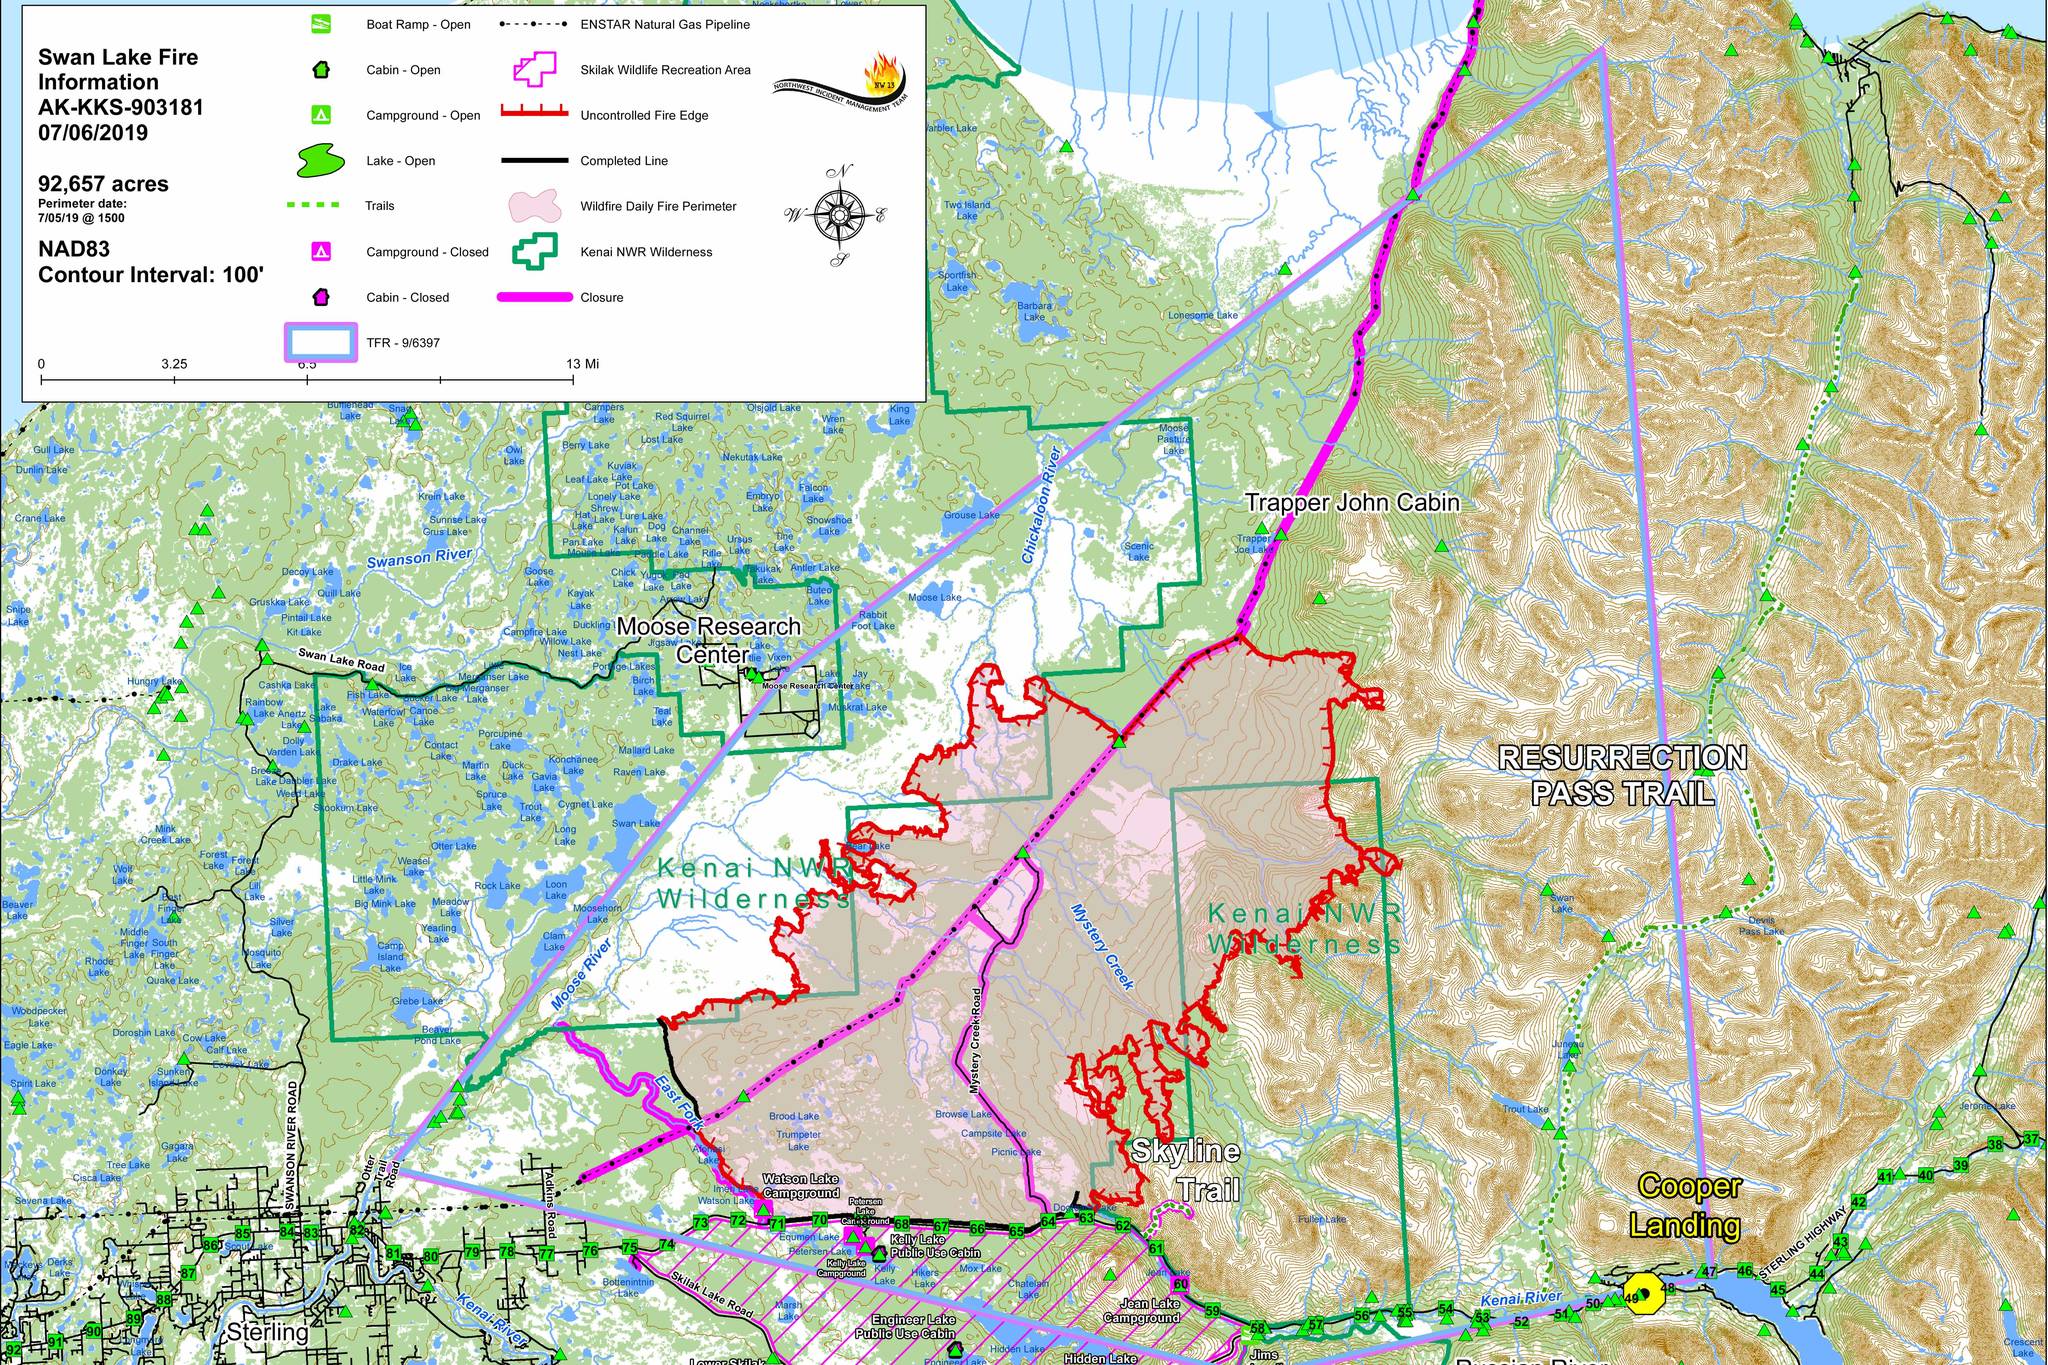 A map of the Swan Lake Fire on the Kenai Peninsula as of July 6, 2019. (Courtesy Northwest 13 Incident Management Team)